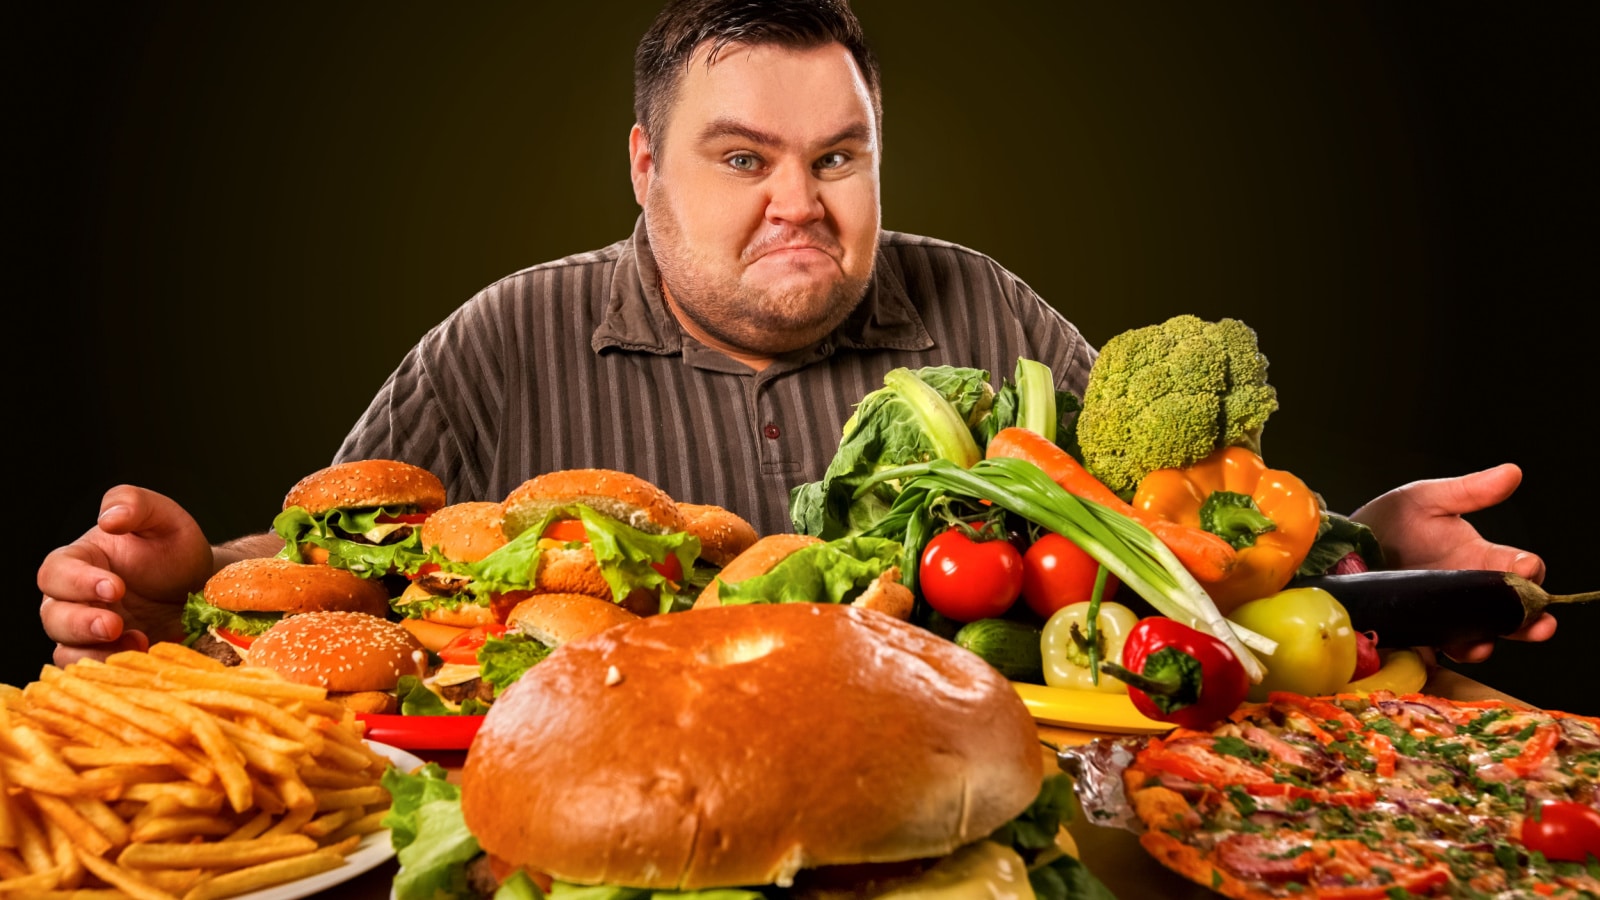 Diet fat man who makes choice between healthy and unhealthy food . Overweight male with hamburgers, french fries. Feast on the occasion of the feast.